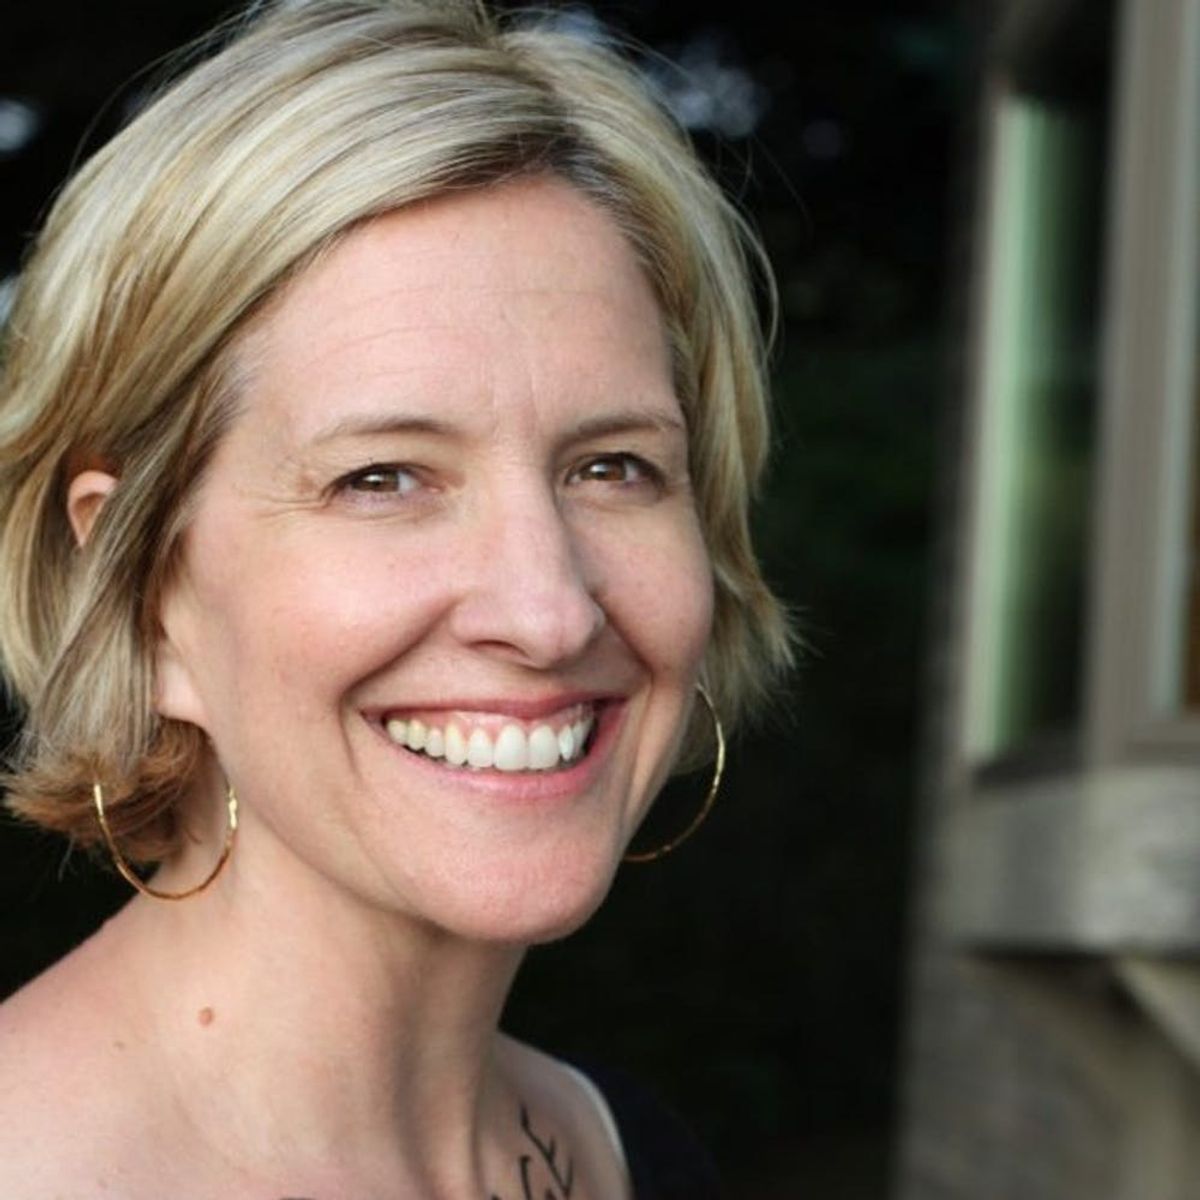 10 Lessons from Brené Brown for Living Your Happiest Life